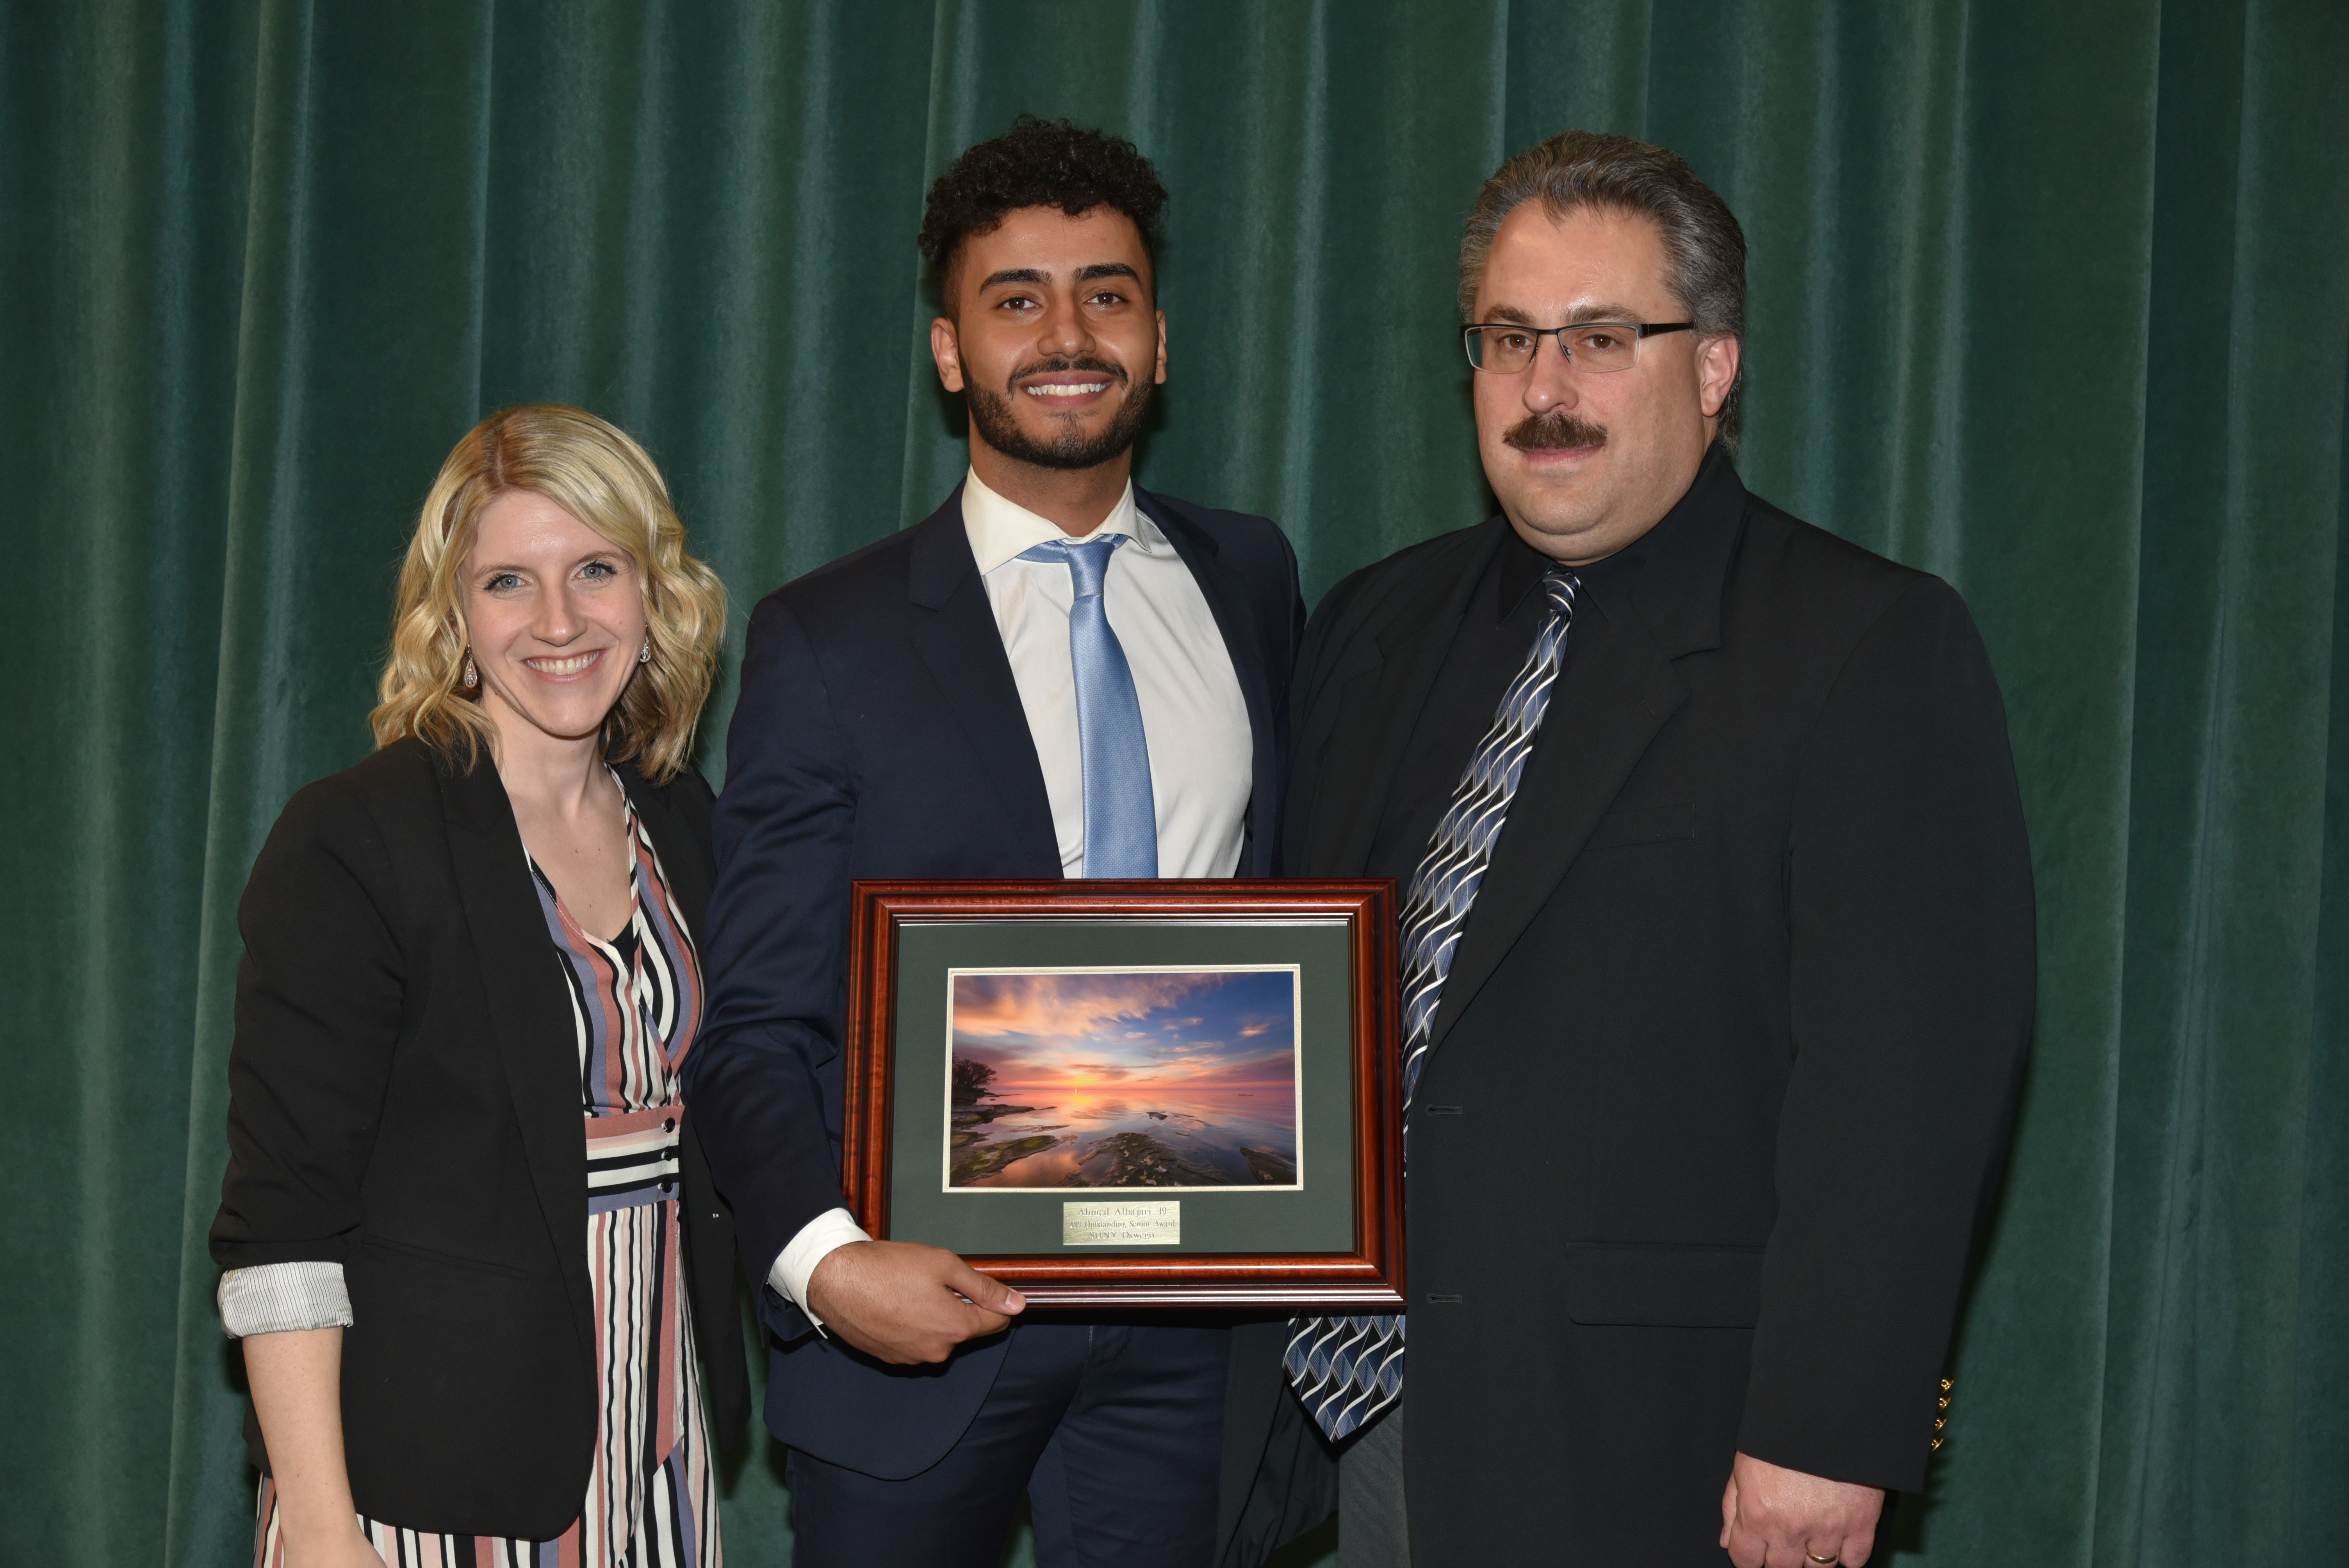 Pictured: Ahmed Albajari at Commencement Eve Dinner and Torchlight Ceremony